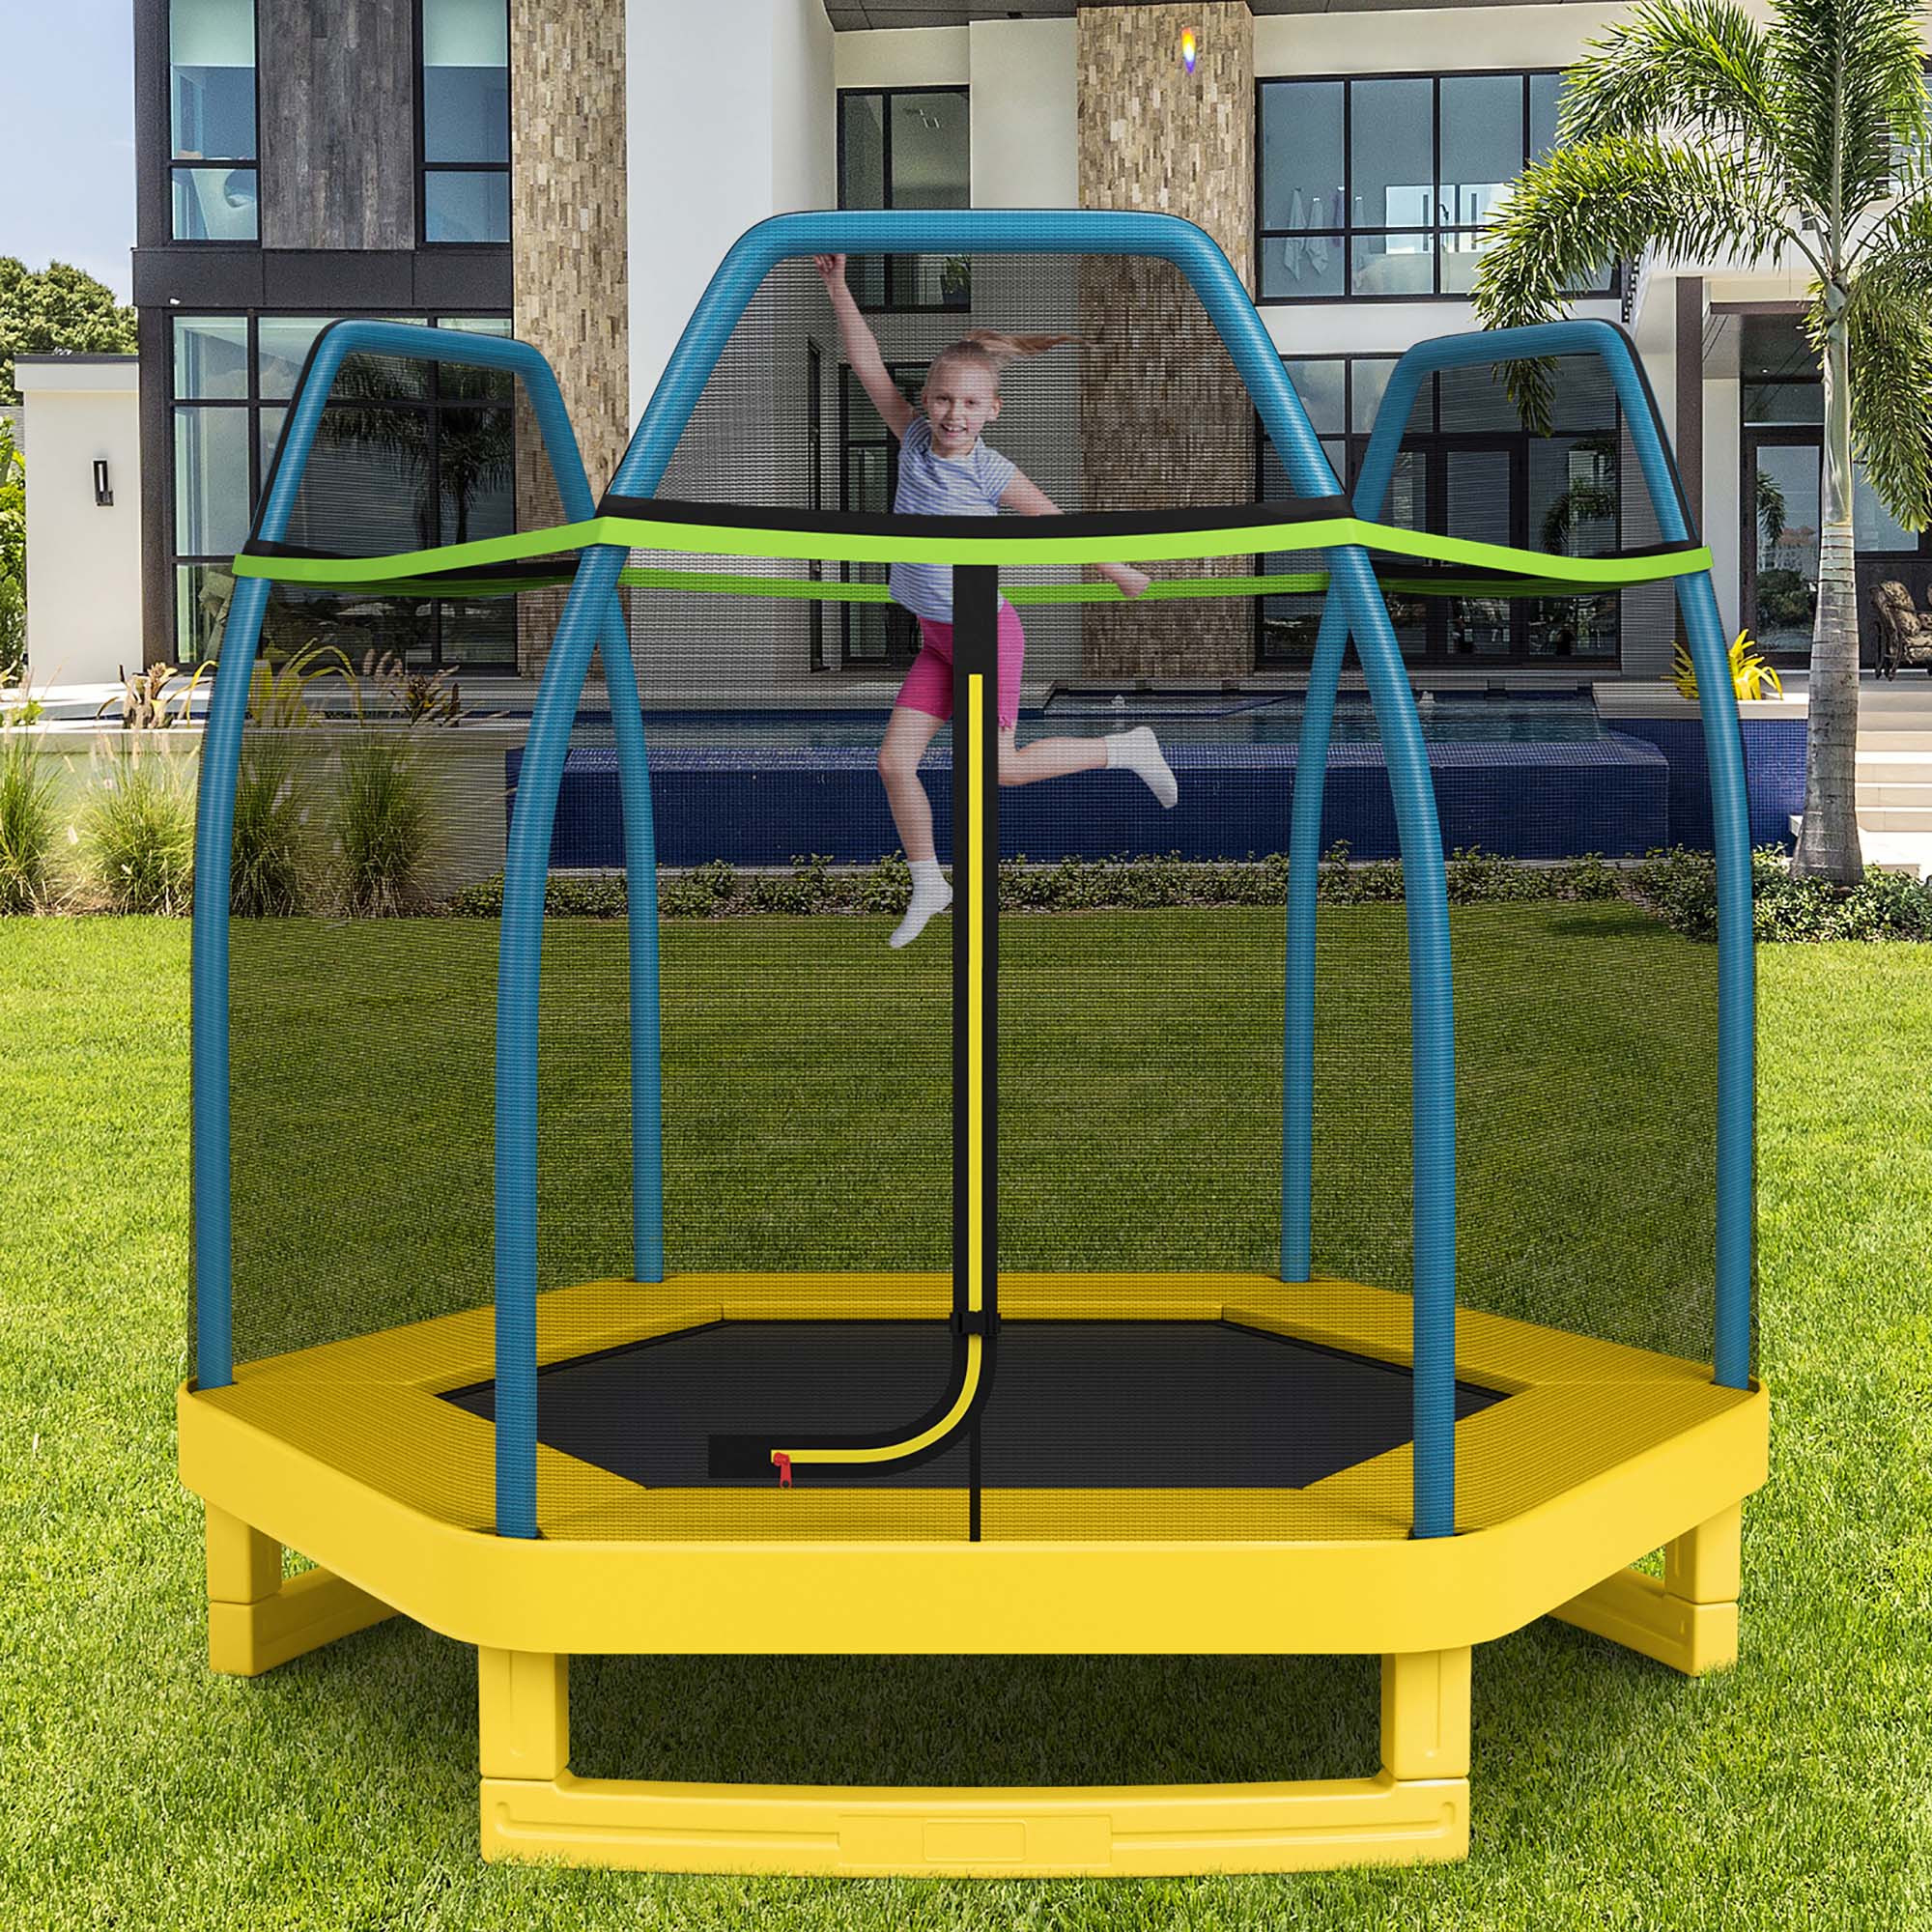 Costway 7 FT Kids Trampoline with Safety Enclosure Net Spring Pad Indoor Outdoor Heavy Duty Green - image 1 of 10